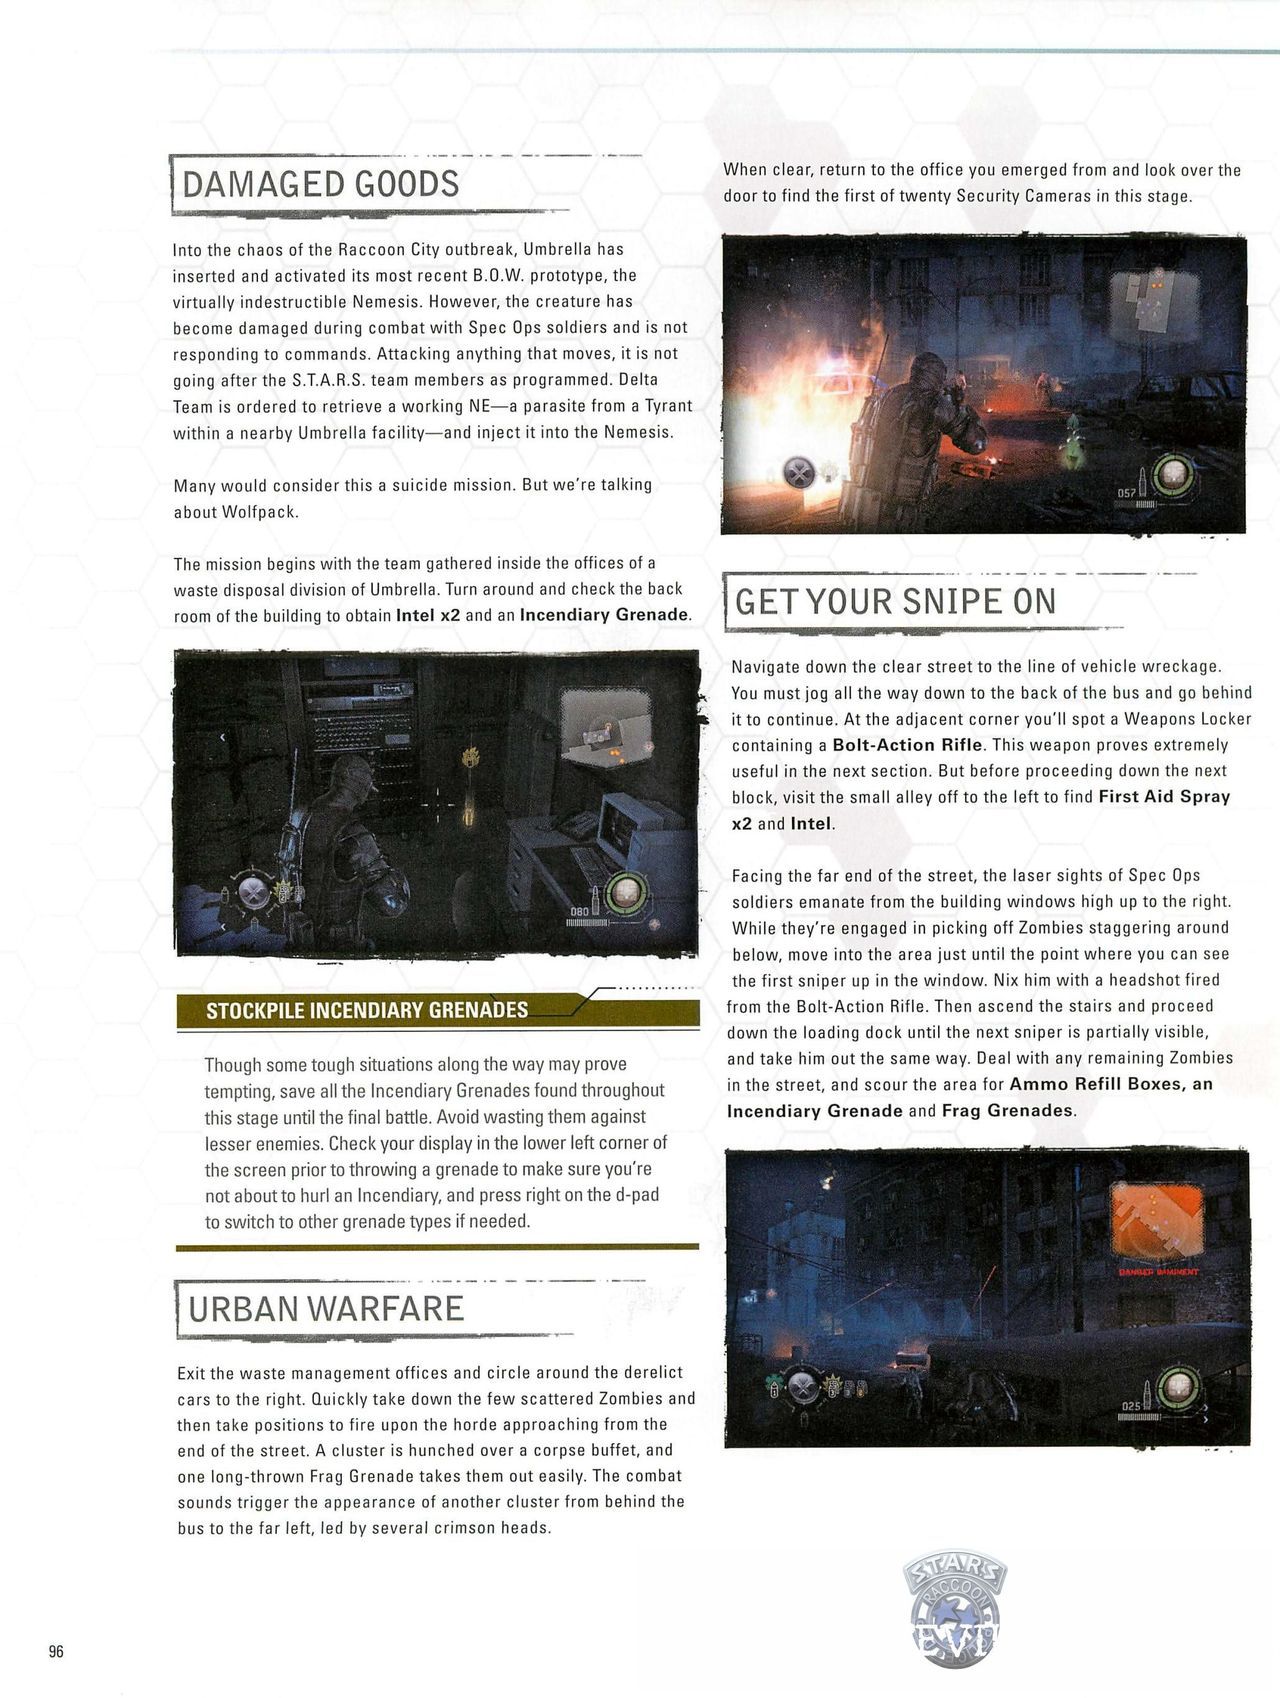 Resident Evil: Operation Raccoon City Official Strategy Guide (watermarked) 98